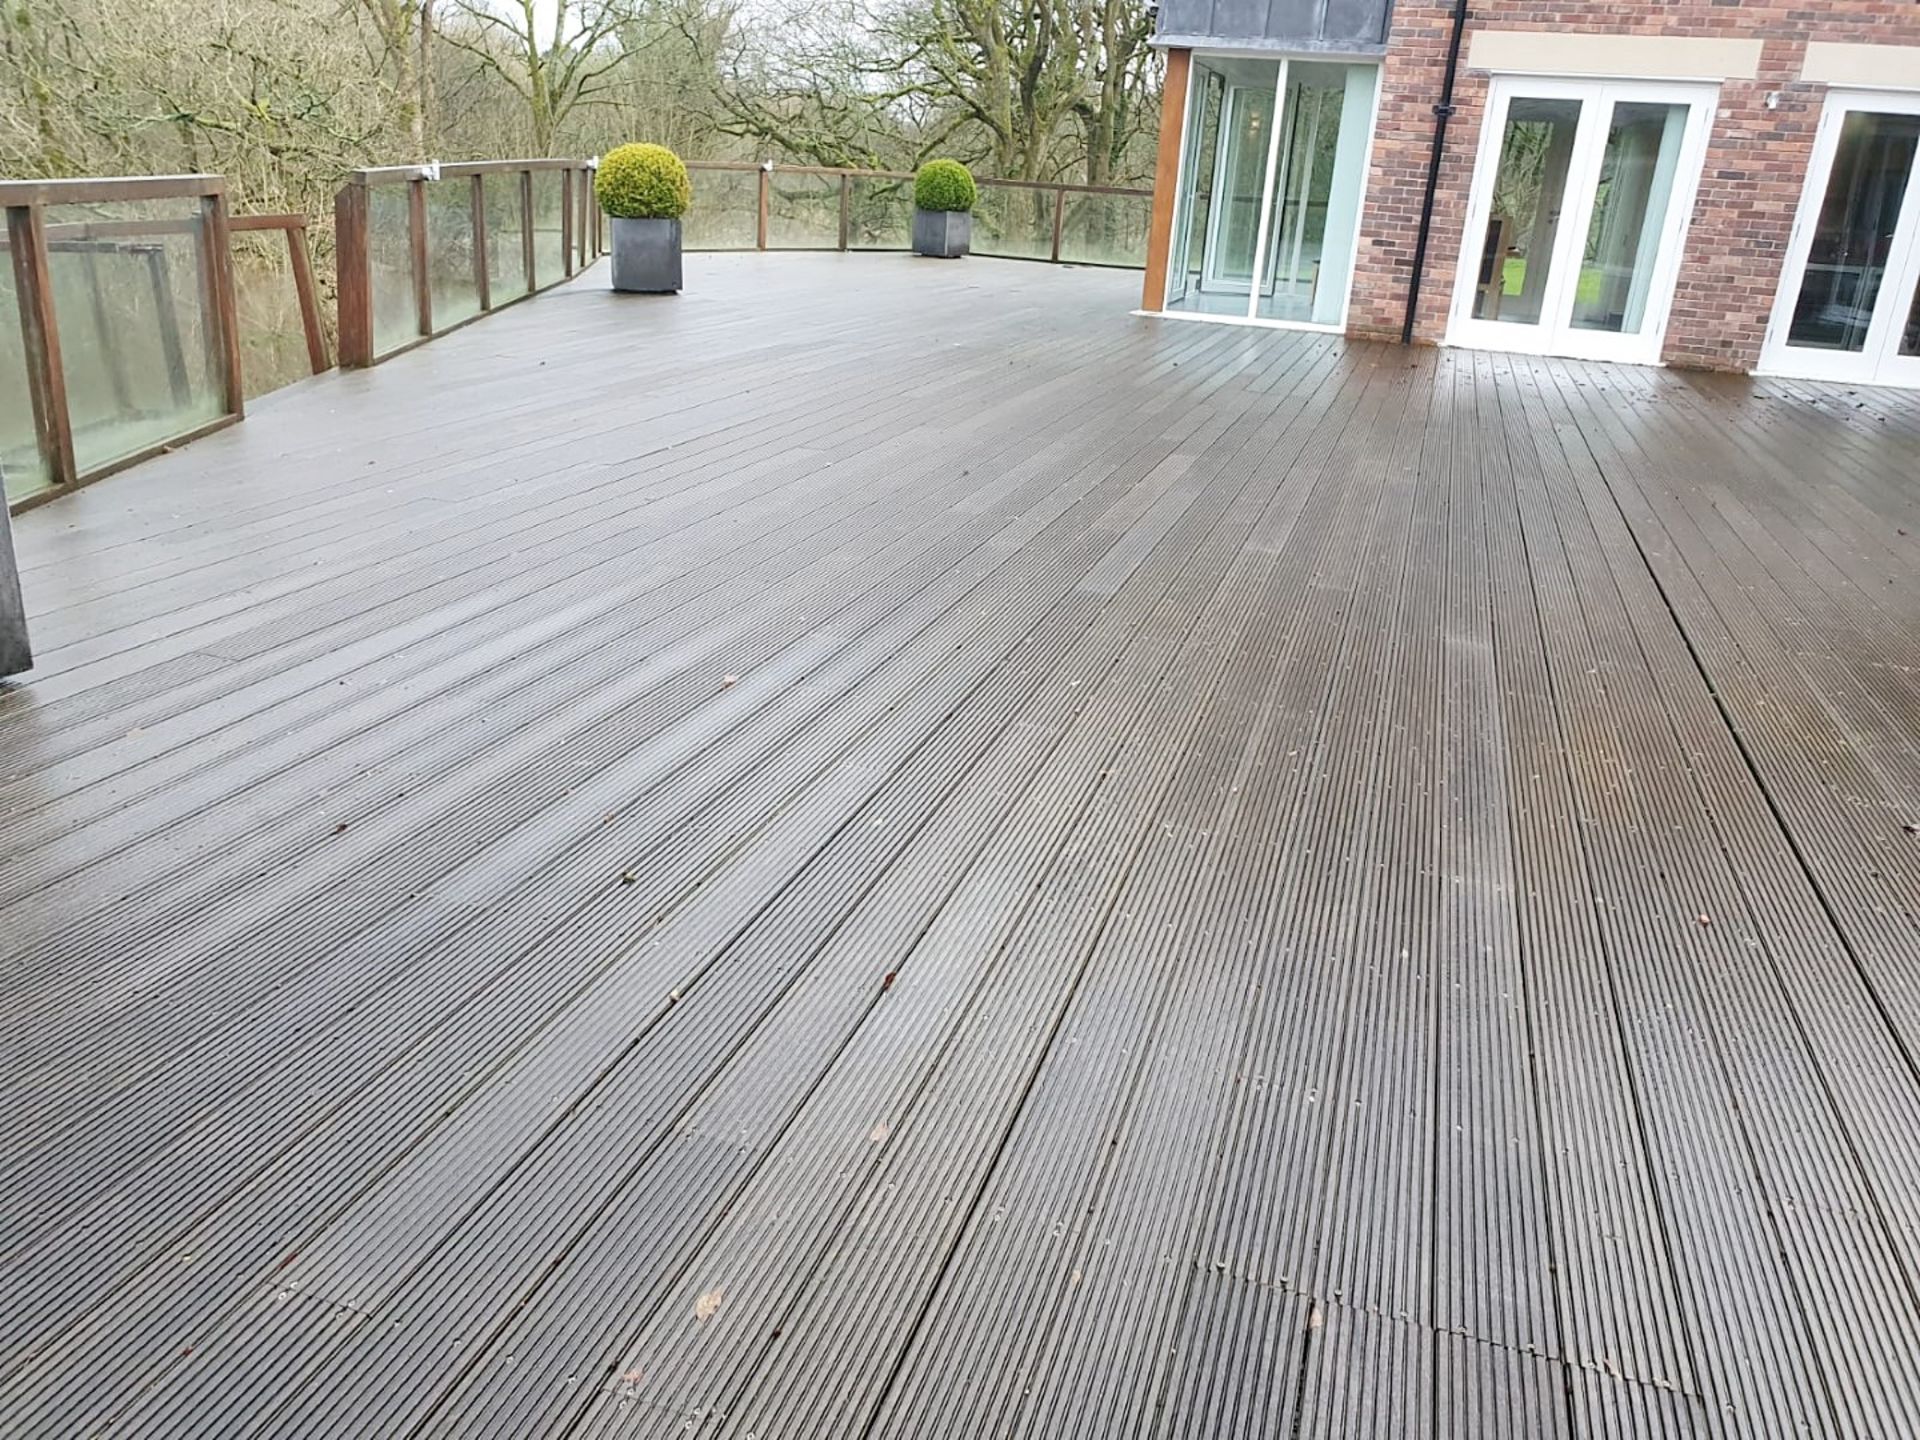 Large Quantity Of Outdoor Timber Decking & Glazed Balustrade - CL487 - Location: Wigan WN1 *NO VAT* - Image 9 of 21